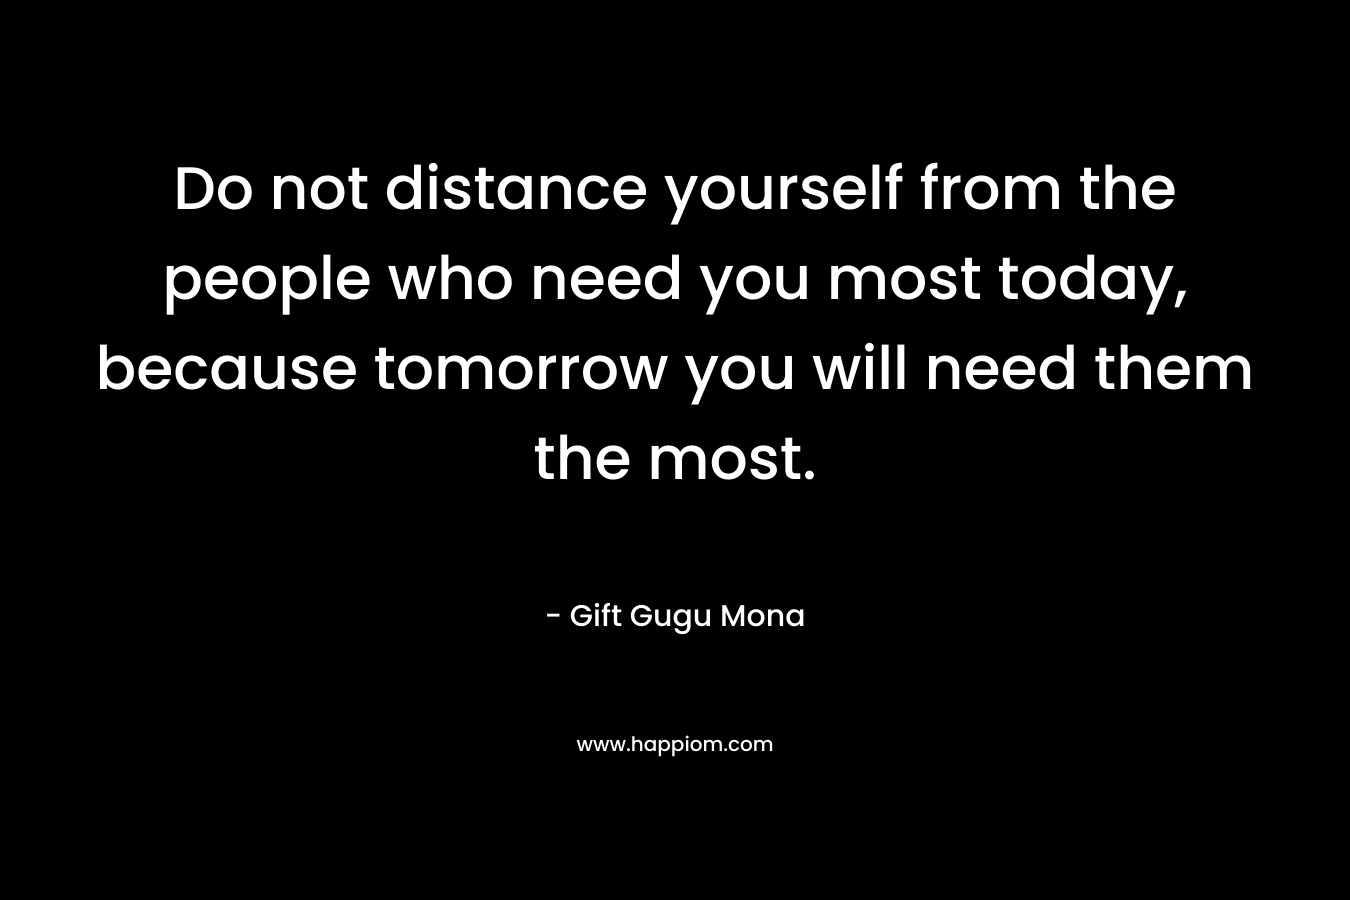 Do not distance yourself from the people who need you most today, because tomorrow you will need them the most.